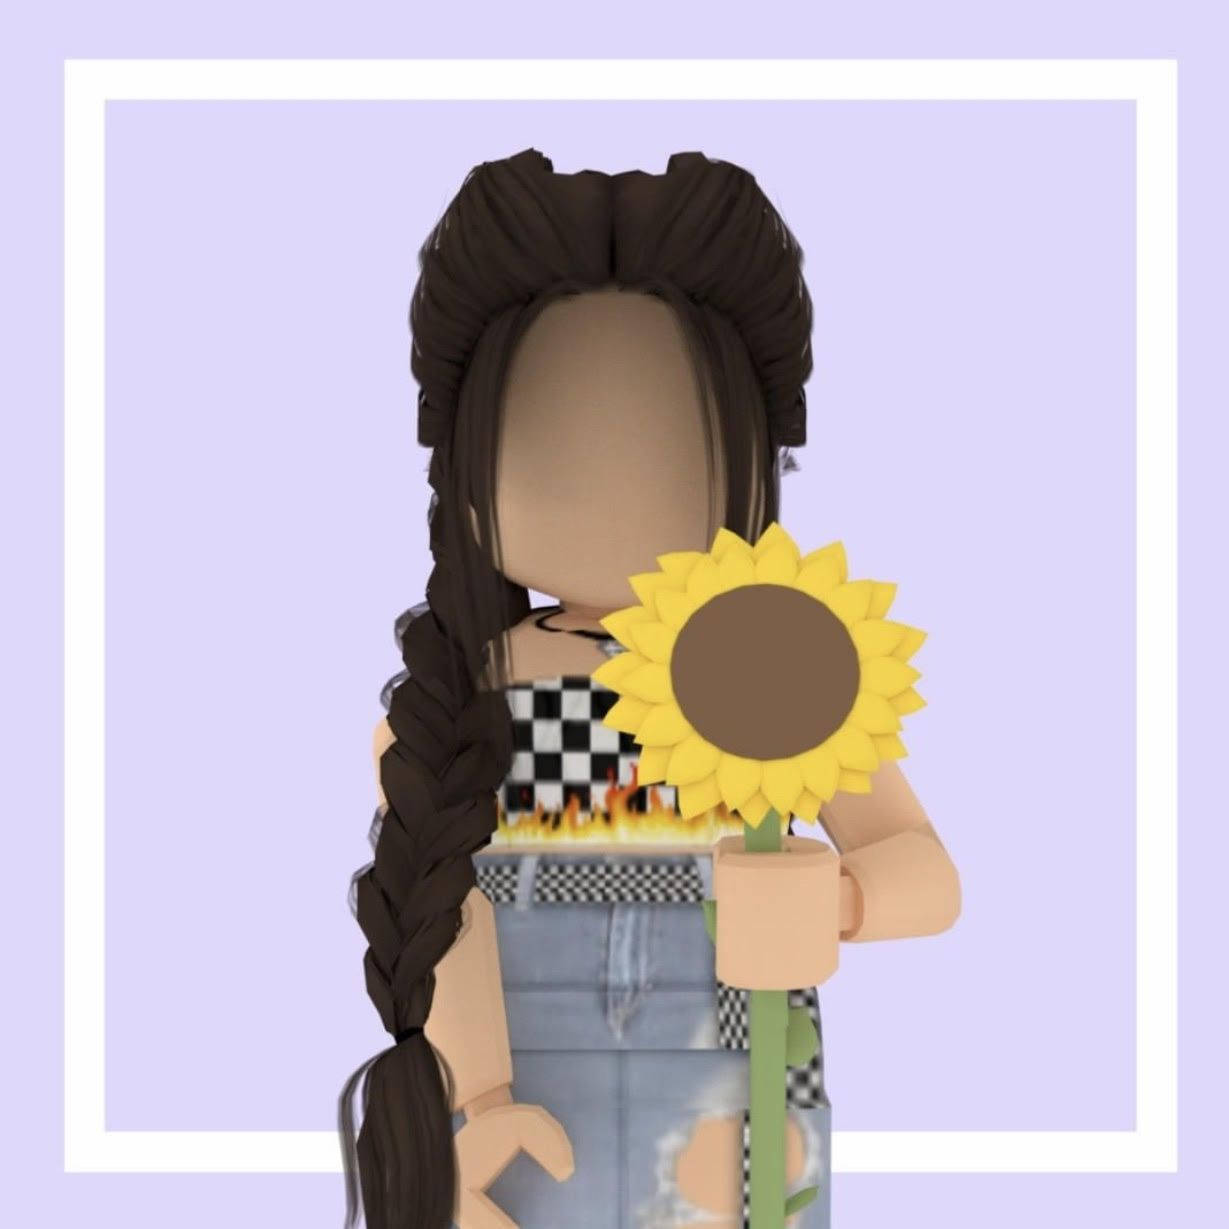 Look How Cute This Roblox Character Is! Wallpaper